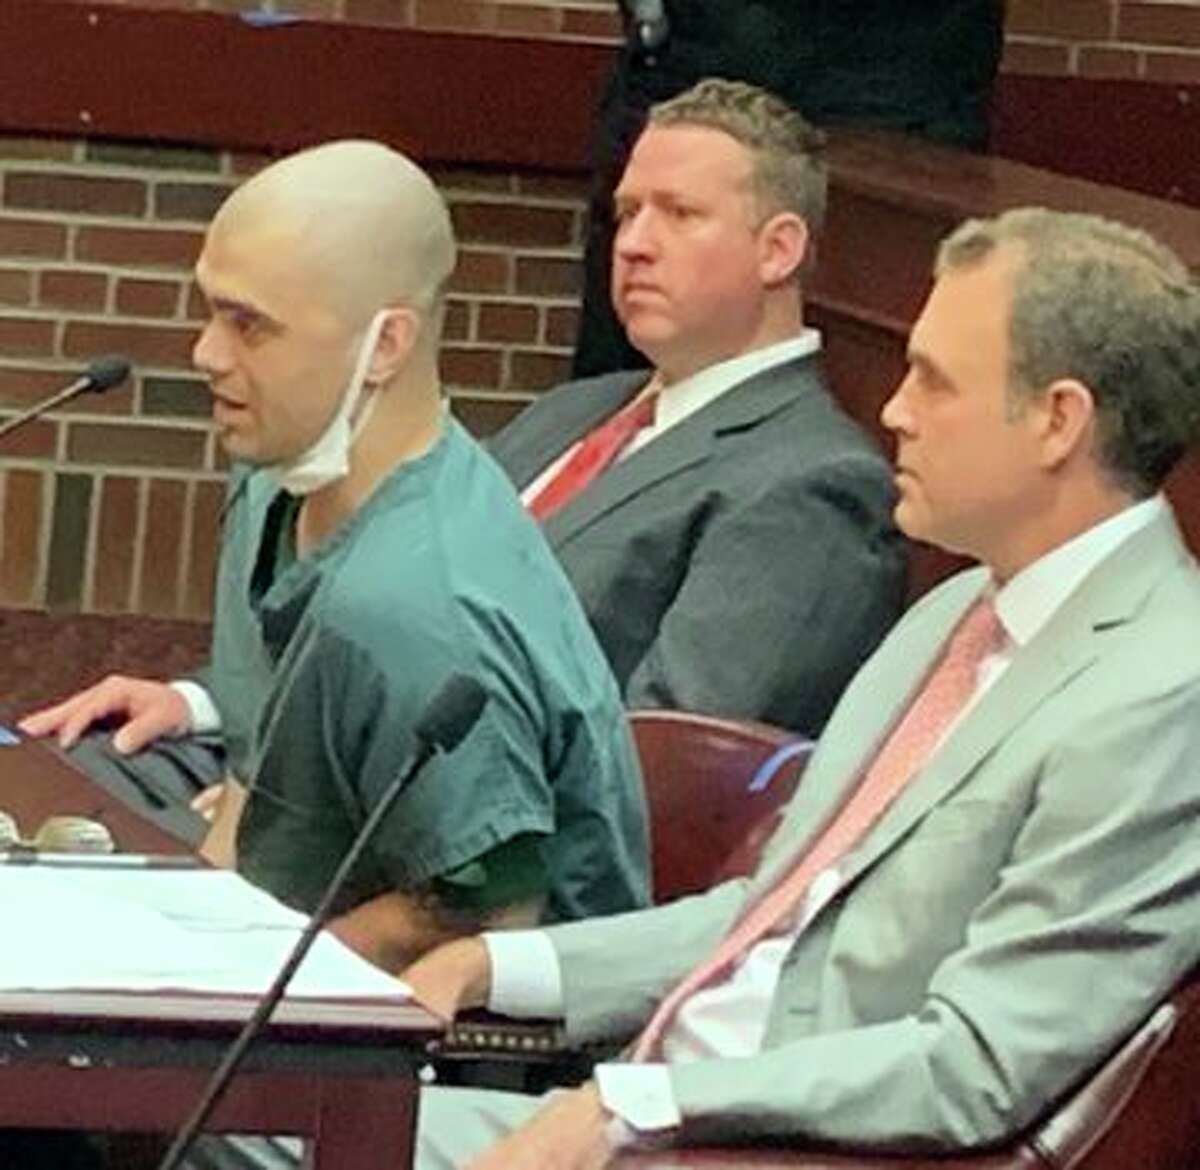 Jimmy Duffy, center, speaks in a Saratoga County court room Wednesday as Judge James A. Murphy III sentenced him to 18 years to life in prison Wednesday for his role in the savage 2019 bludgeoning of 22-year-old Allyzibeth Lamont in a Johnstown deli.